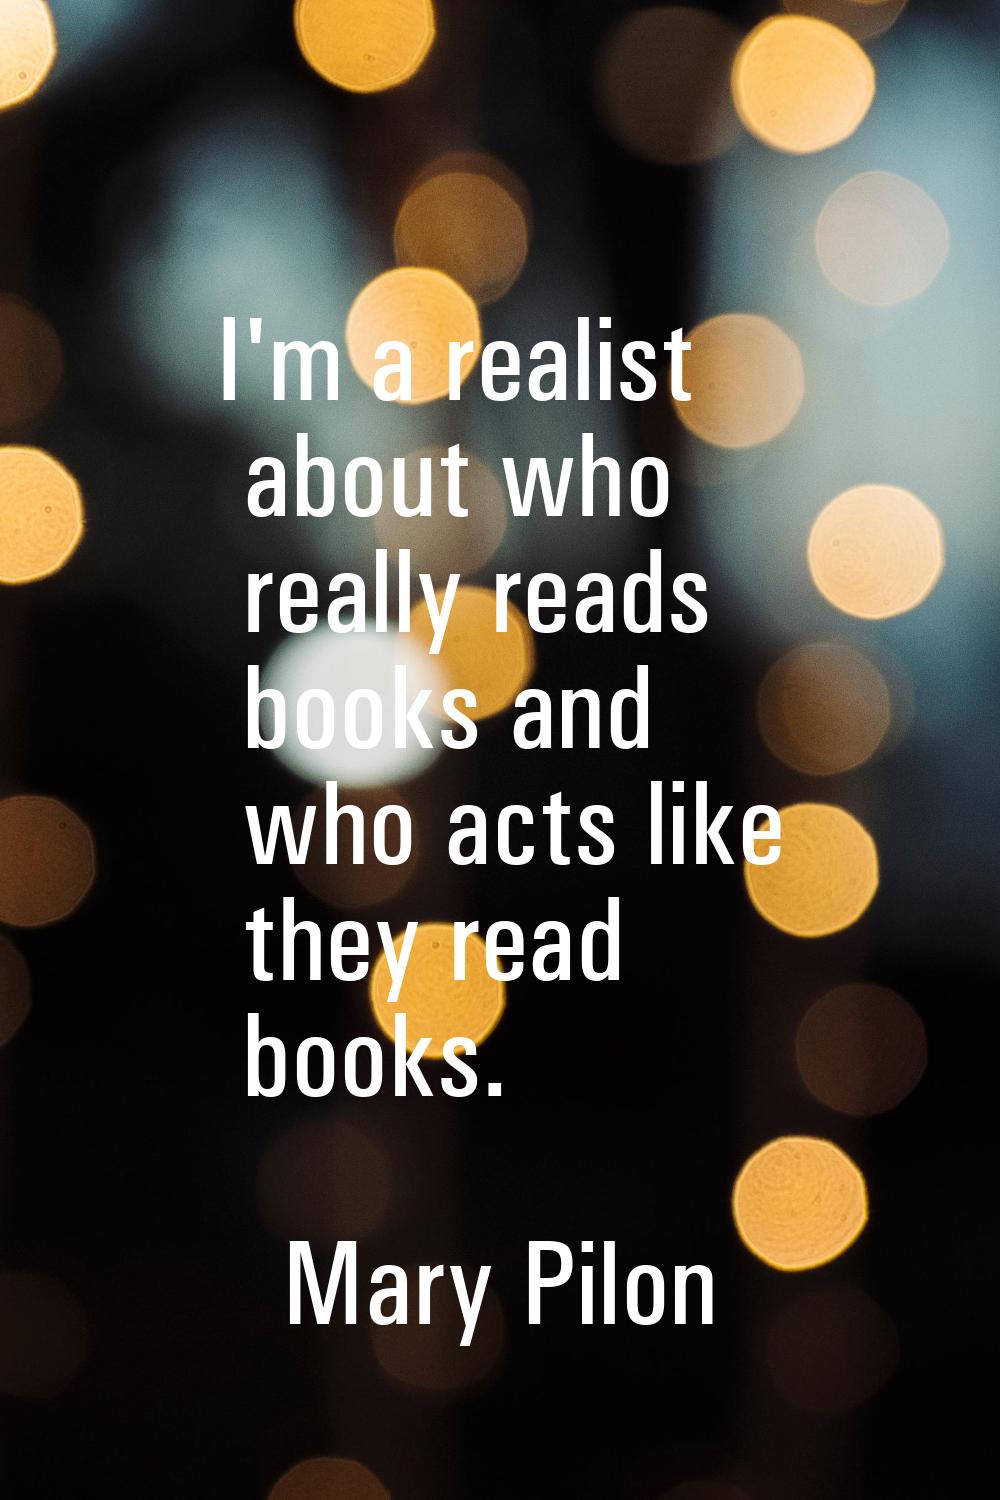 I'm a realist about who really reads books and who acts like they read books.